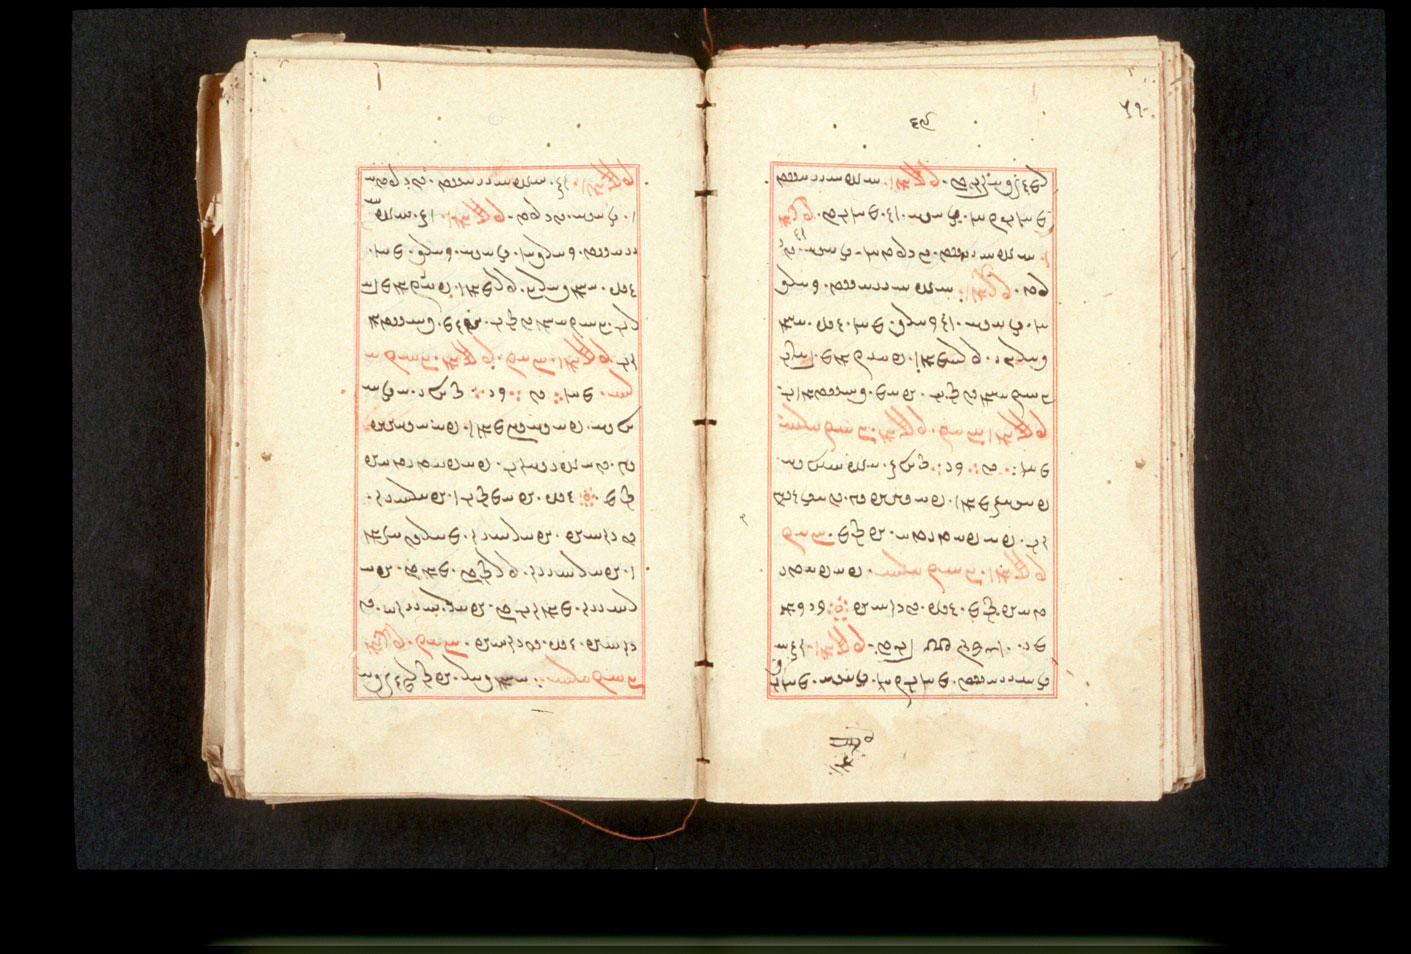 Folios 69v (right) and 70r (left)